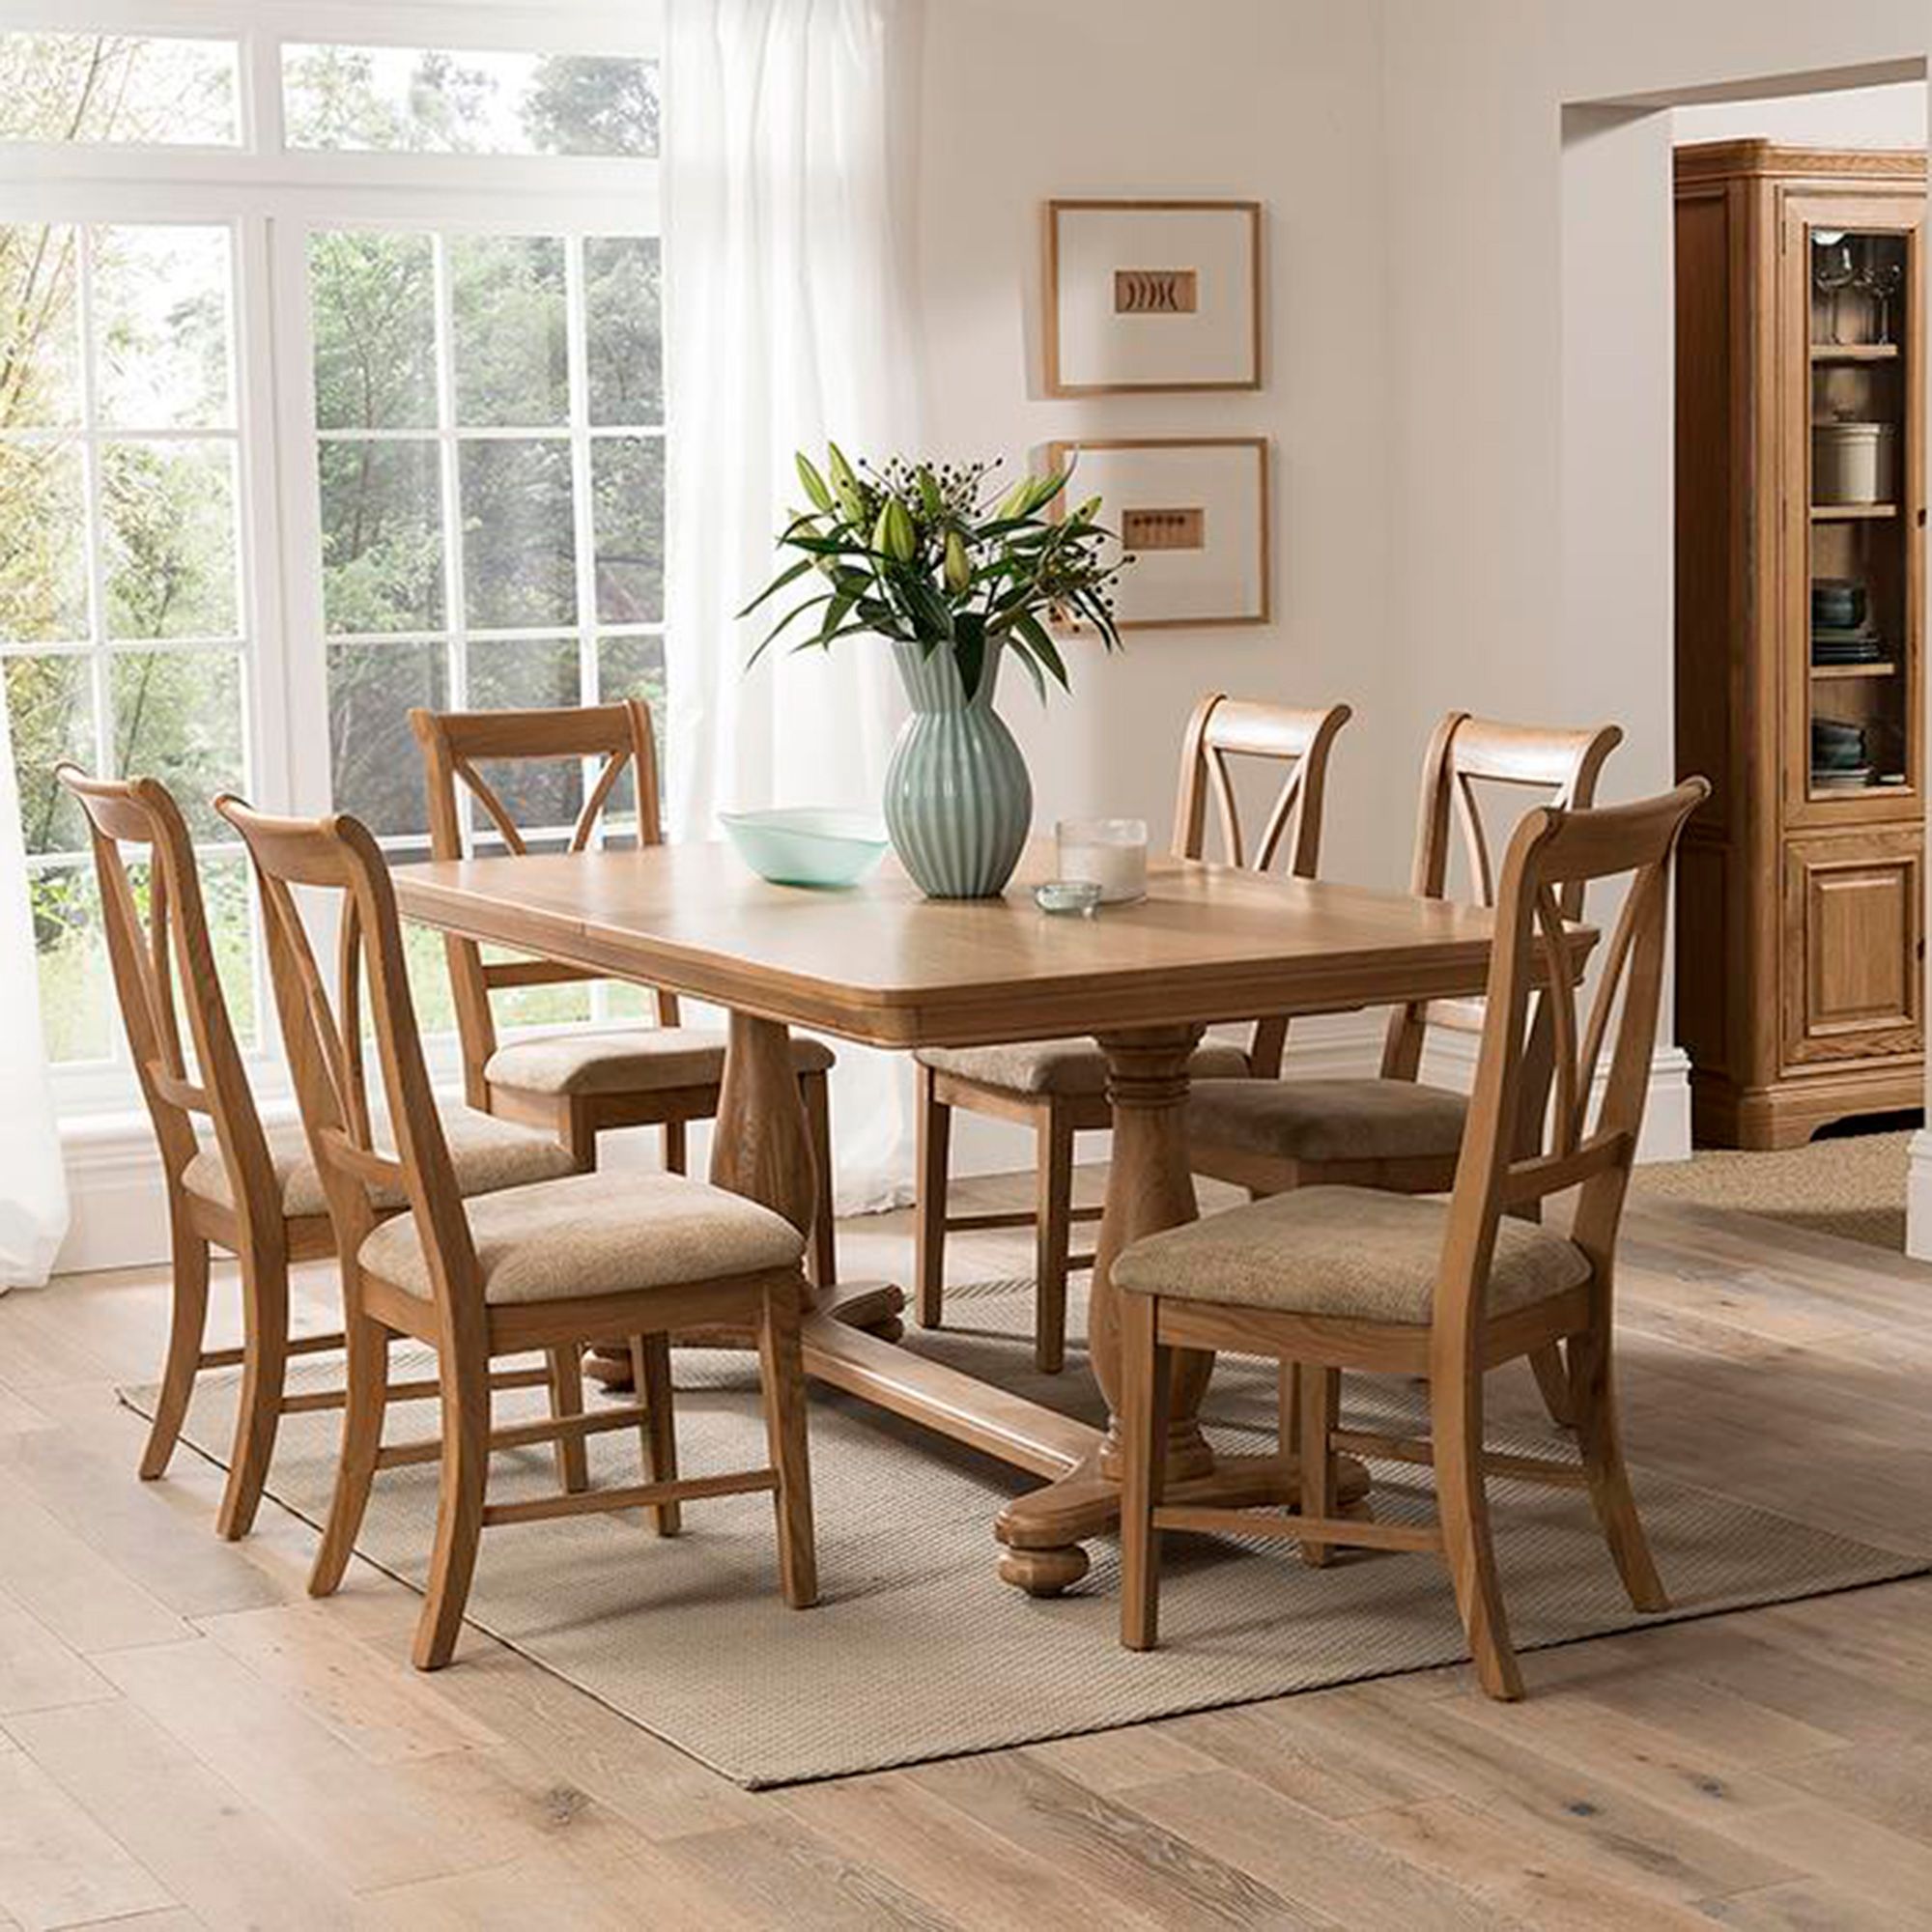 Brid Oak 4-6 Person Oval Dining Table - Dining Tables - Meubles